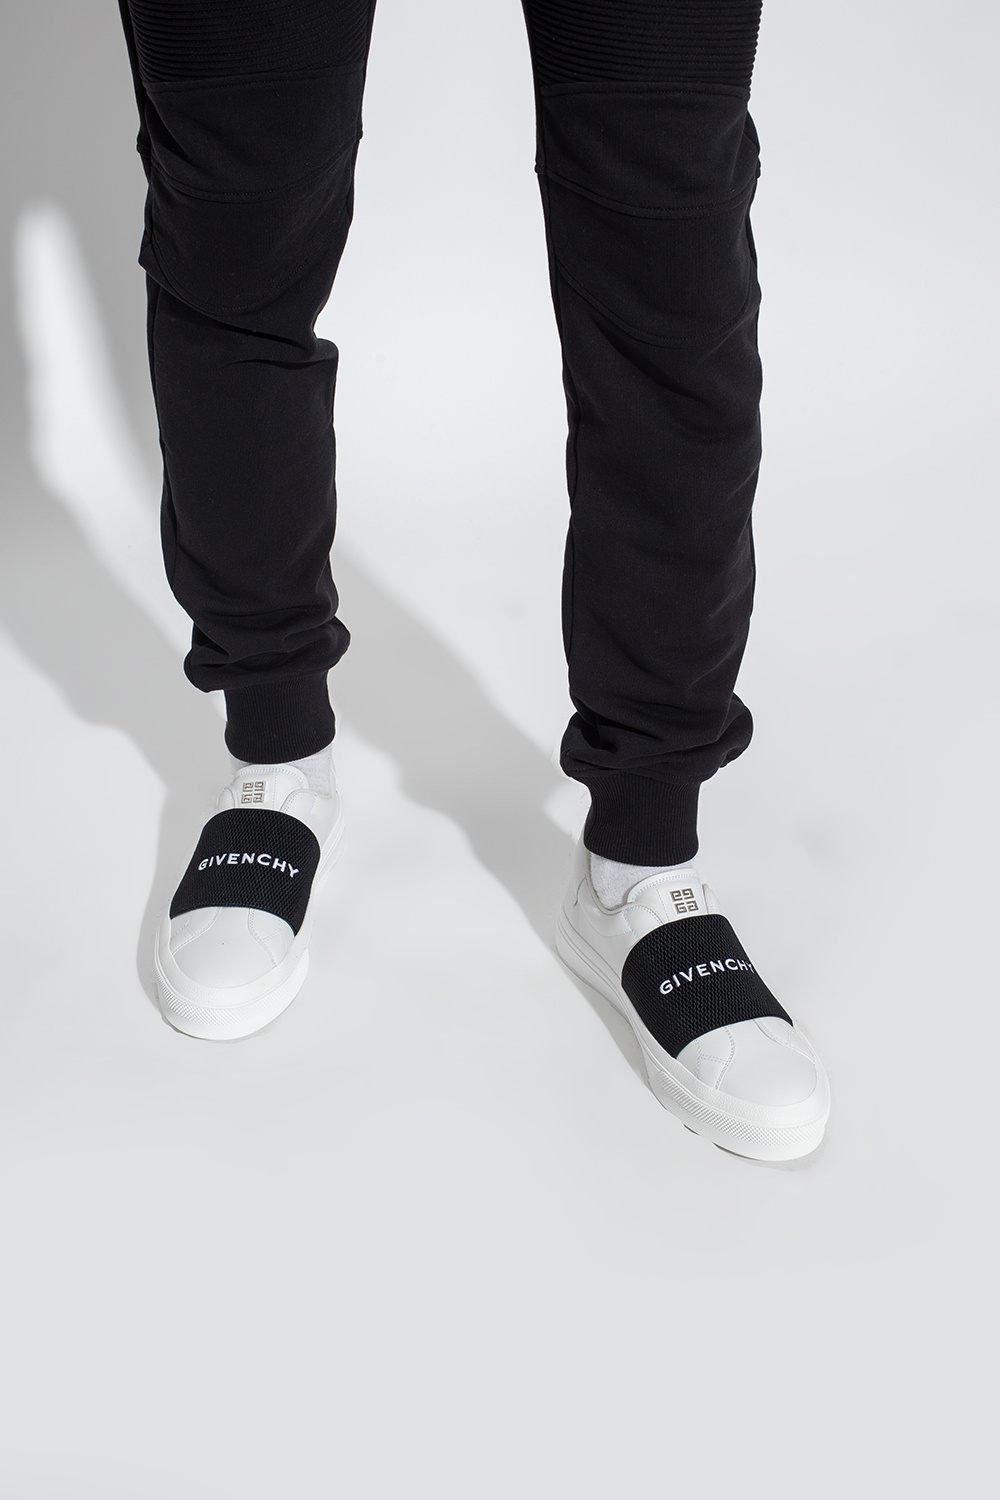 givenchy elba leather loafers - 'New City' sneakers JEANS Givenchy -  IetpShops Spain